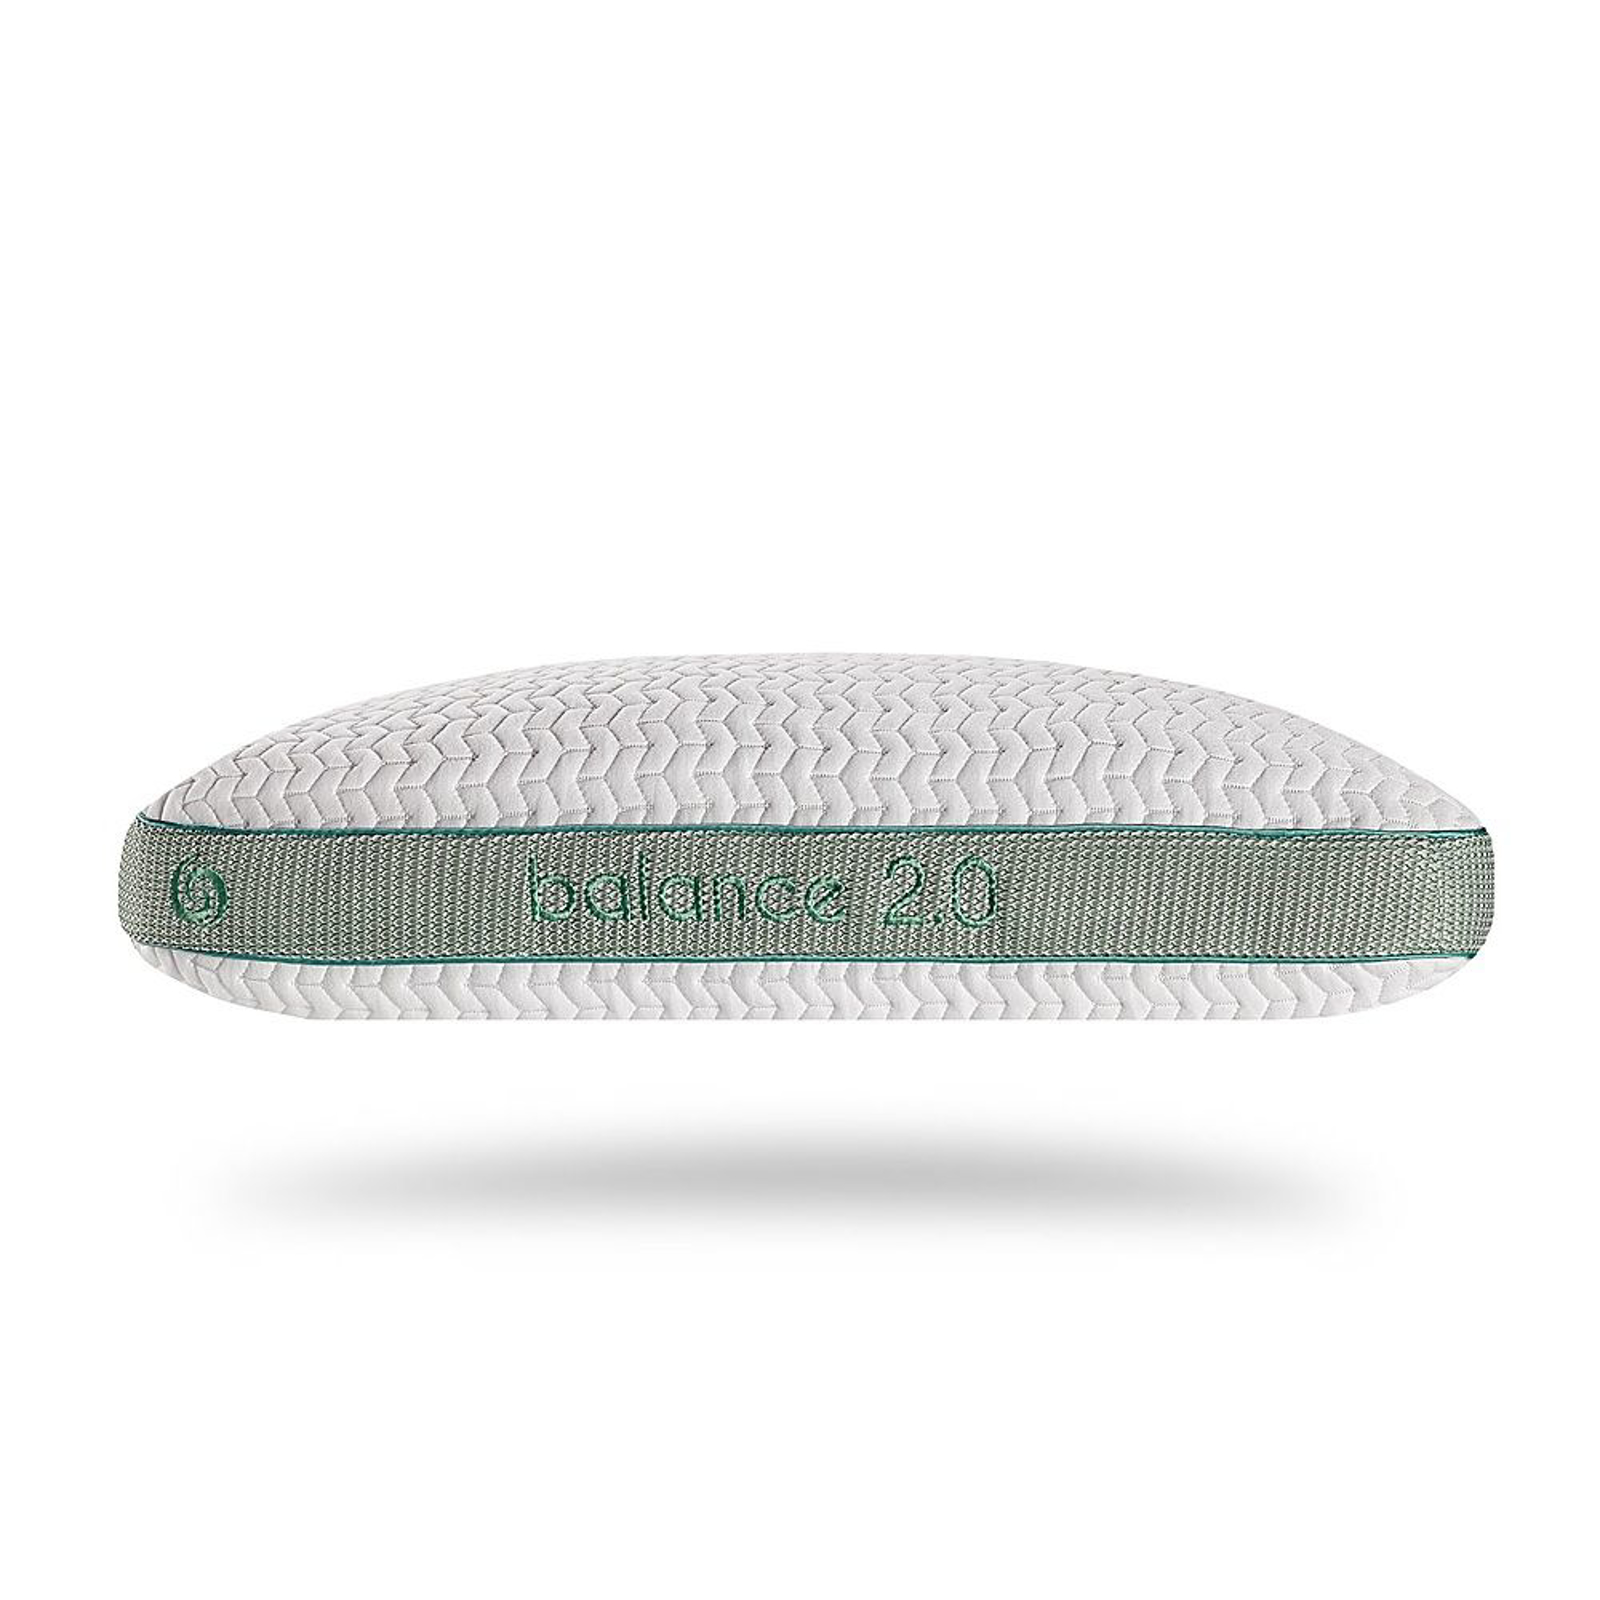 Picture of Bedgear Balance 2.0 Series Pillow